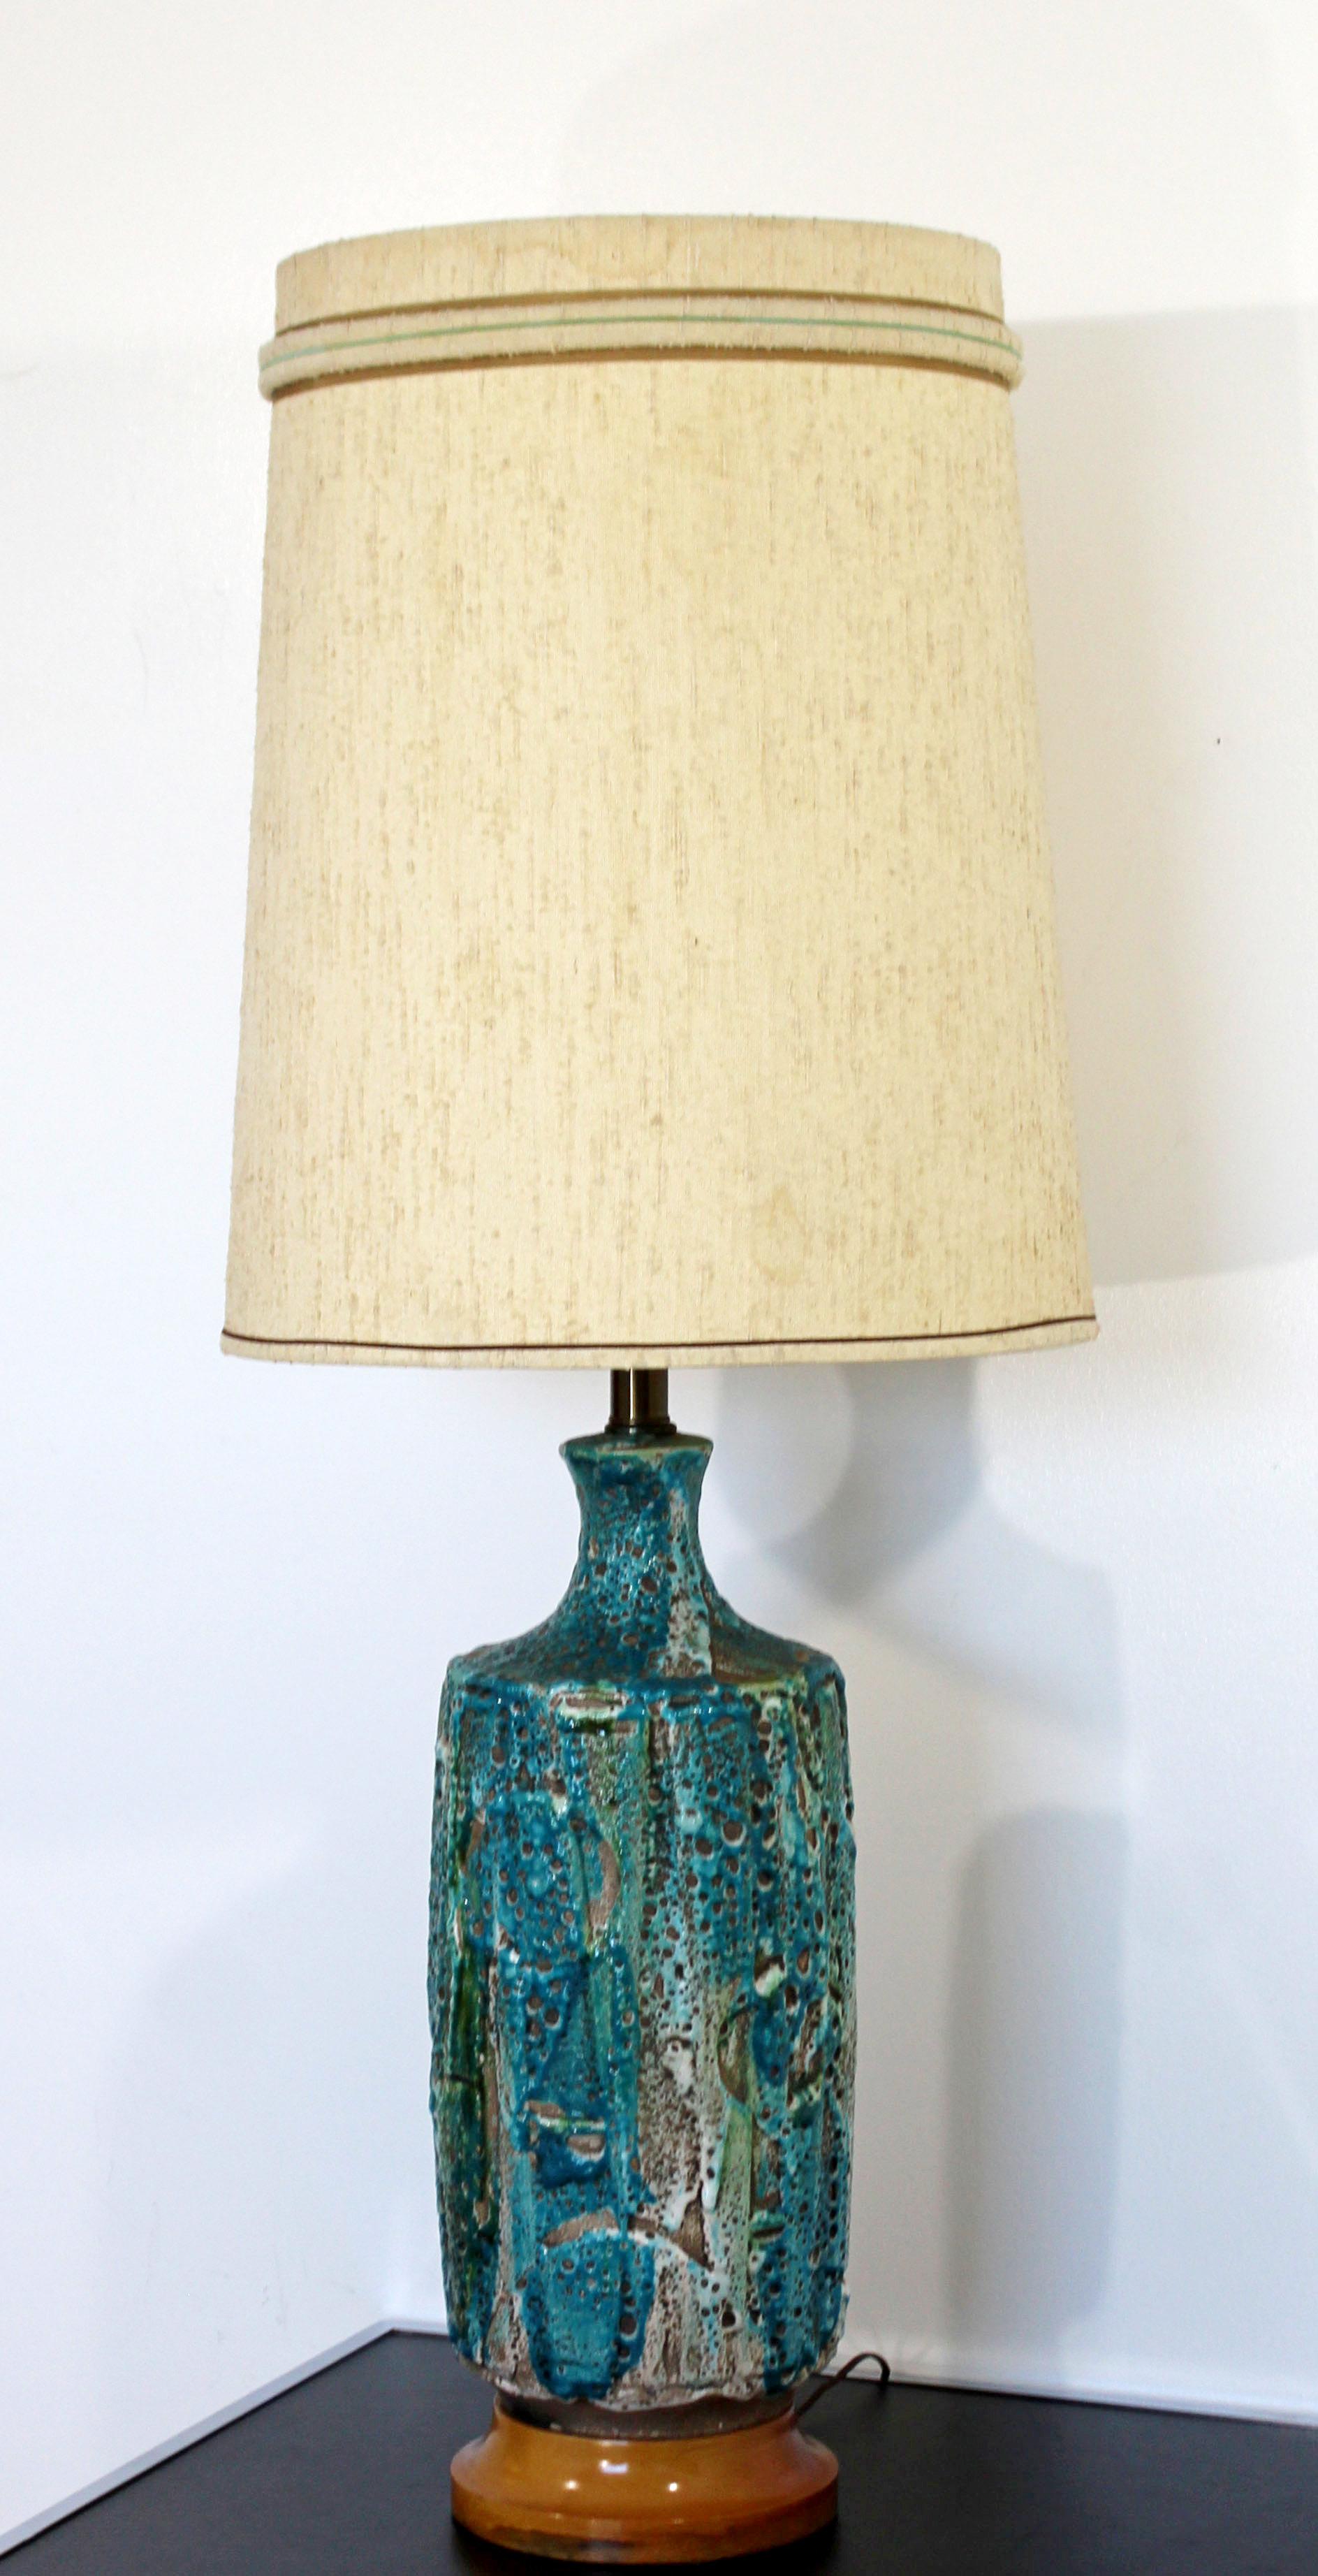 For your consideration is a magnificent, large fat lava, blue glazed, ceramic table lamp, with original shade and brass finial, made in Germany, circa the 1960s. In very good vintage condition. The dimensions of the lamp are 8.5